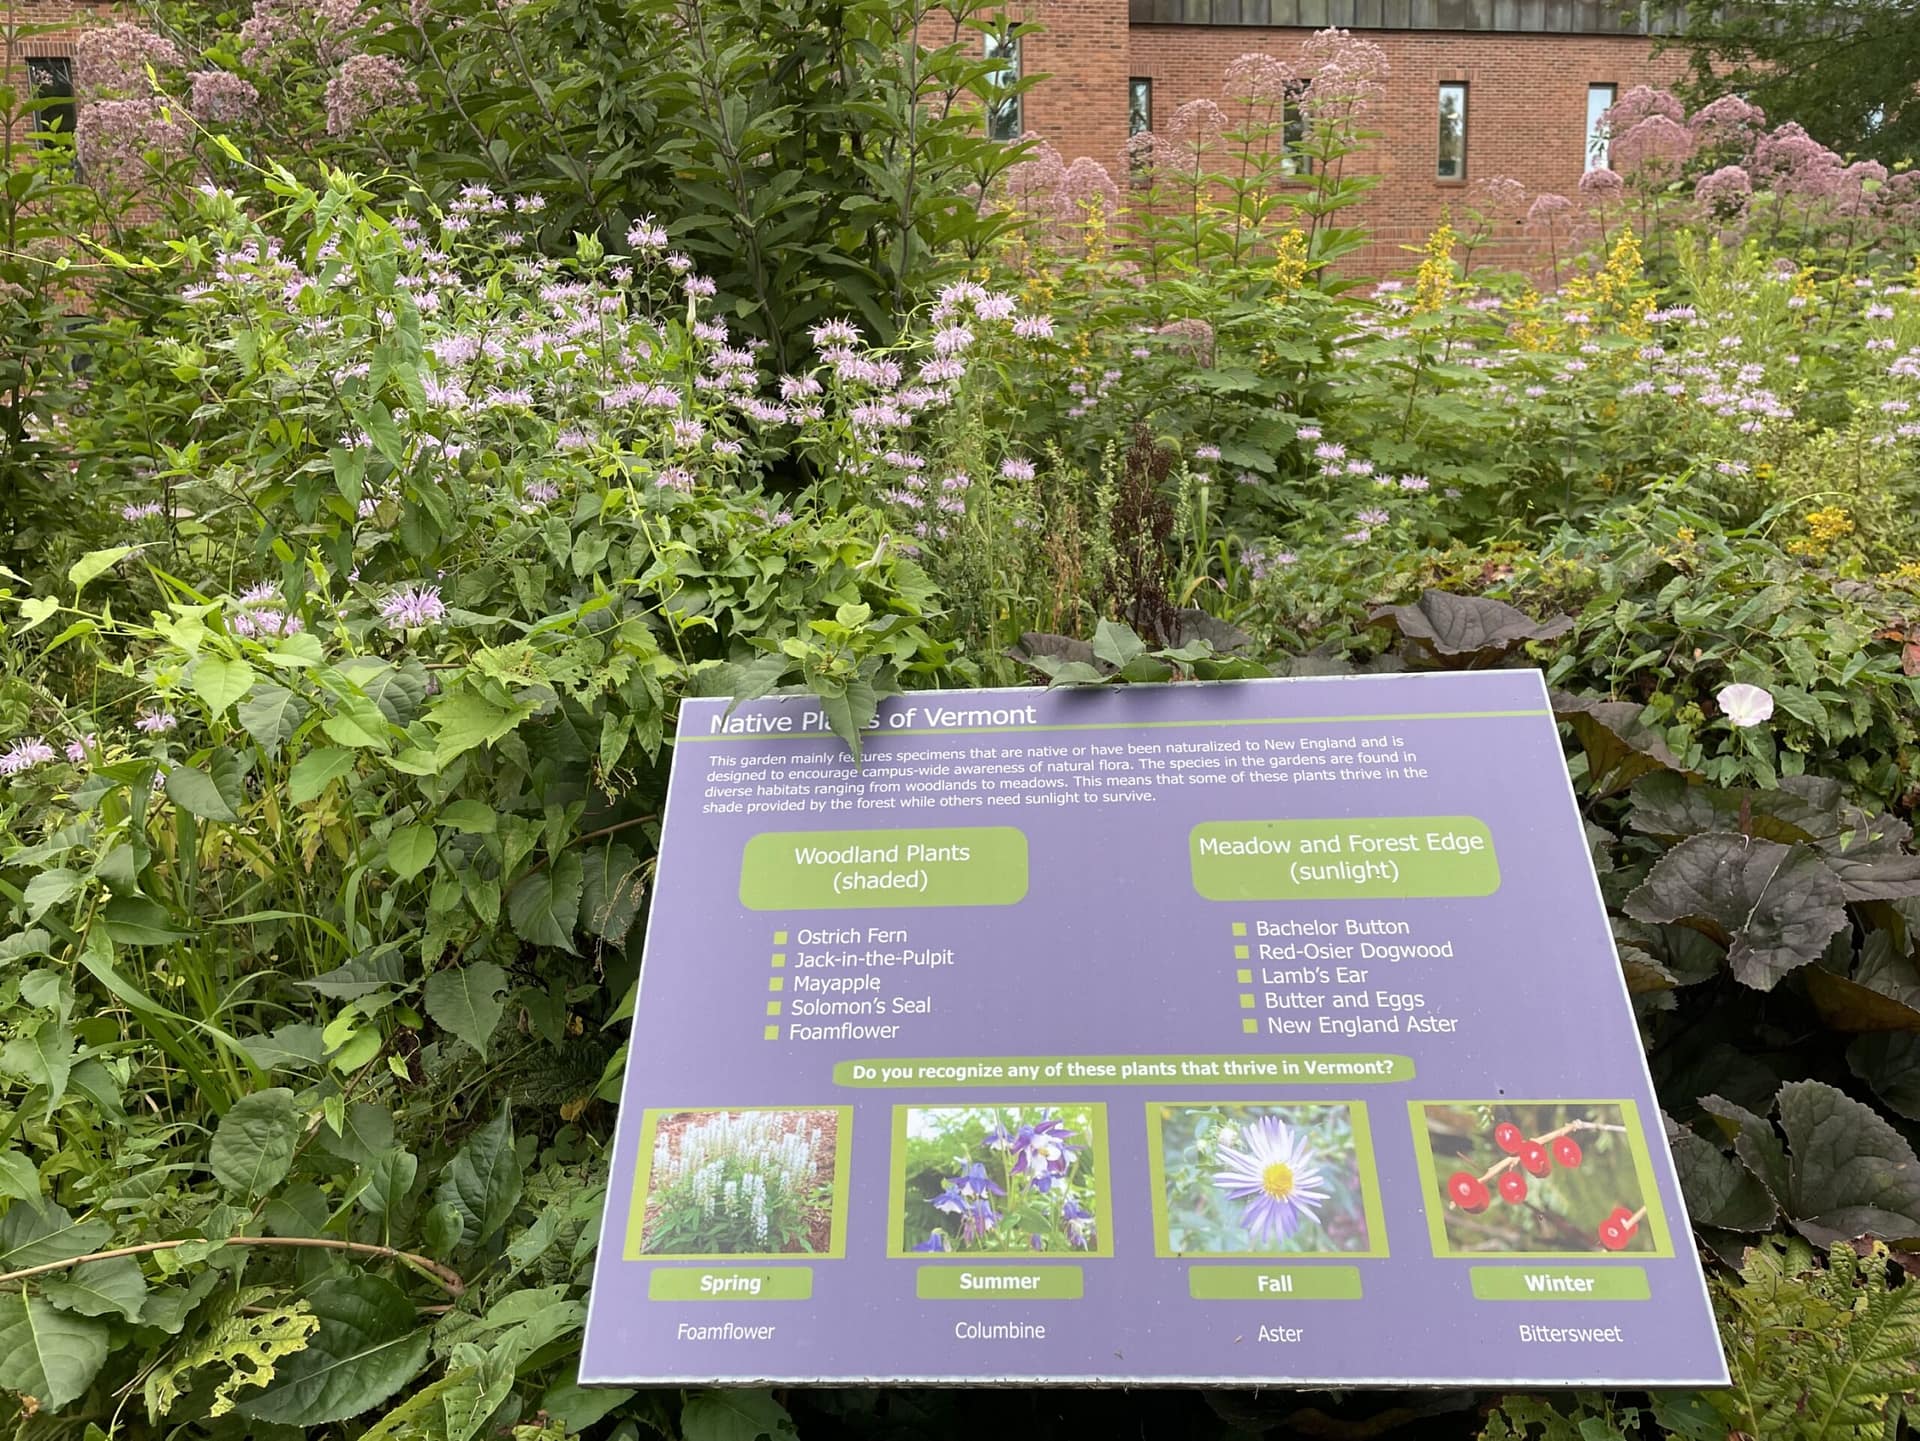 Part of the Teaching Gardens is dedicated to showcasing native Vermont plants.